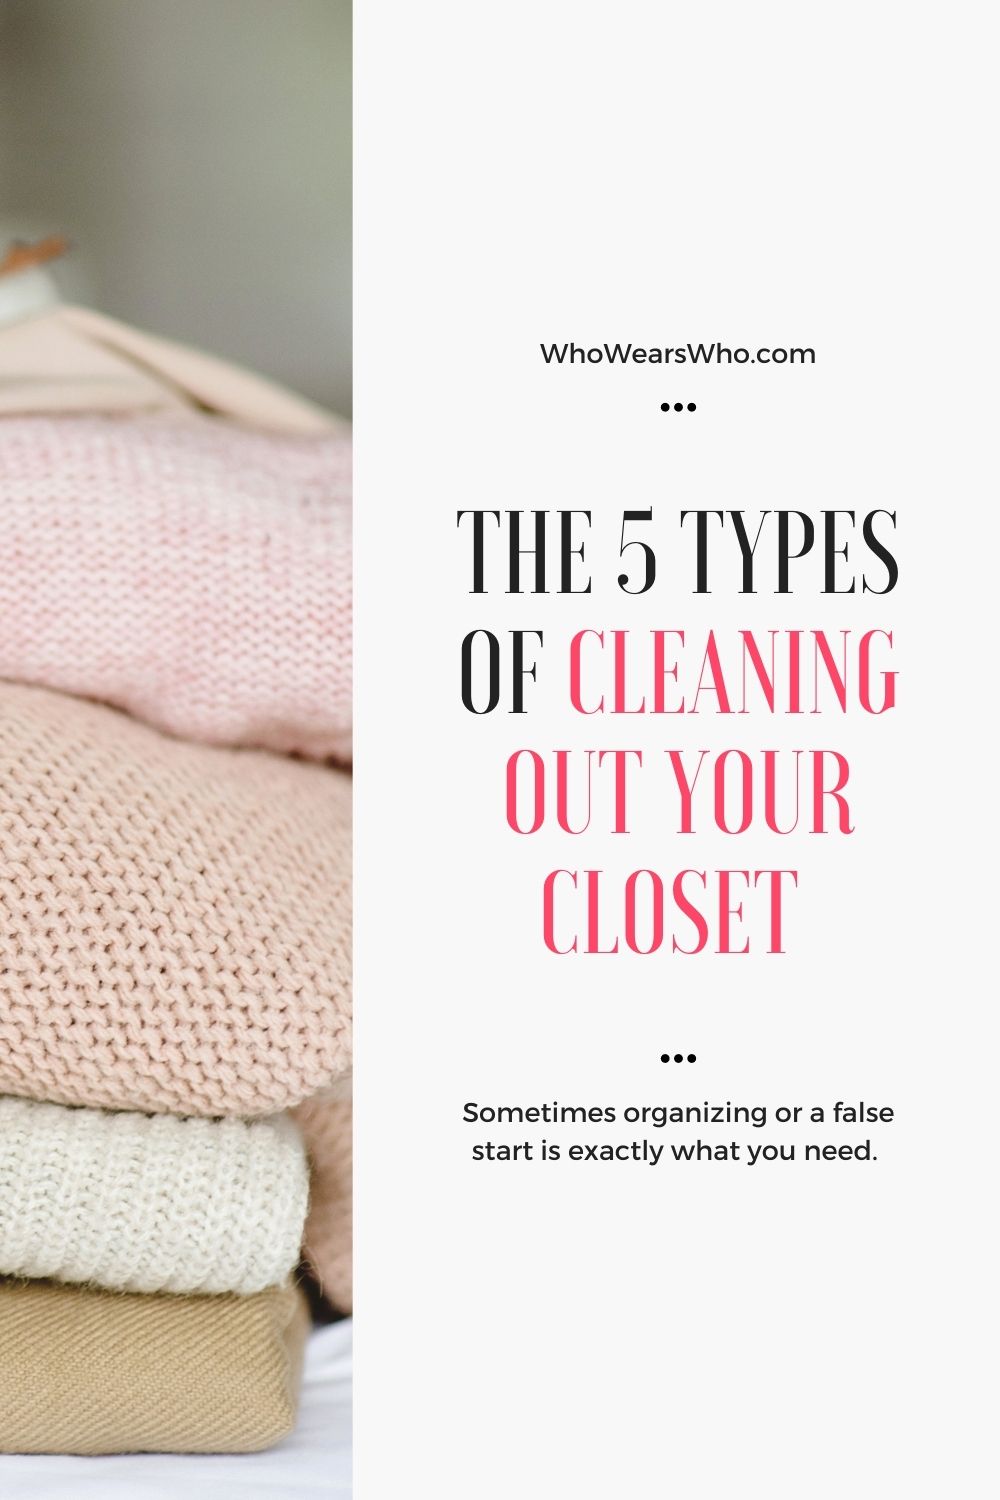 Closet Clean Out The 5 Types of Cleaning Out Your Closet